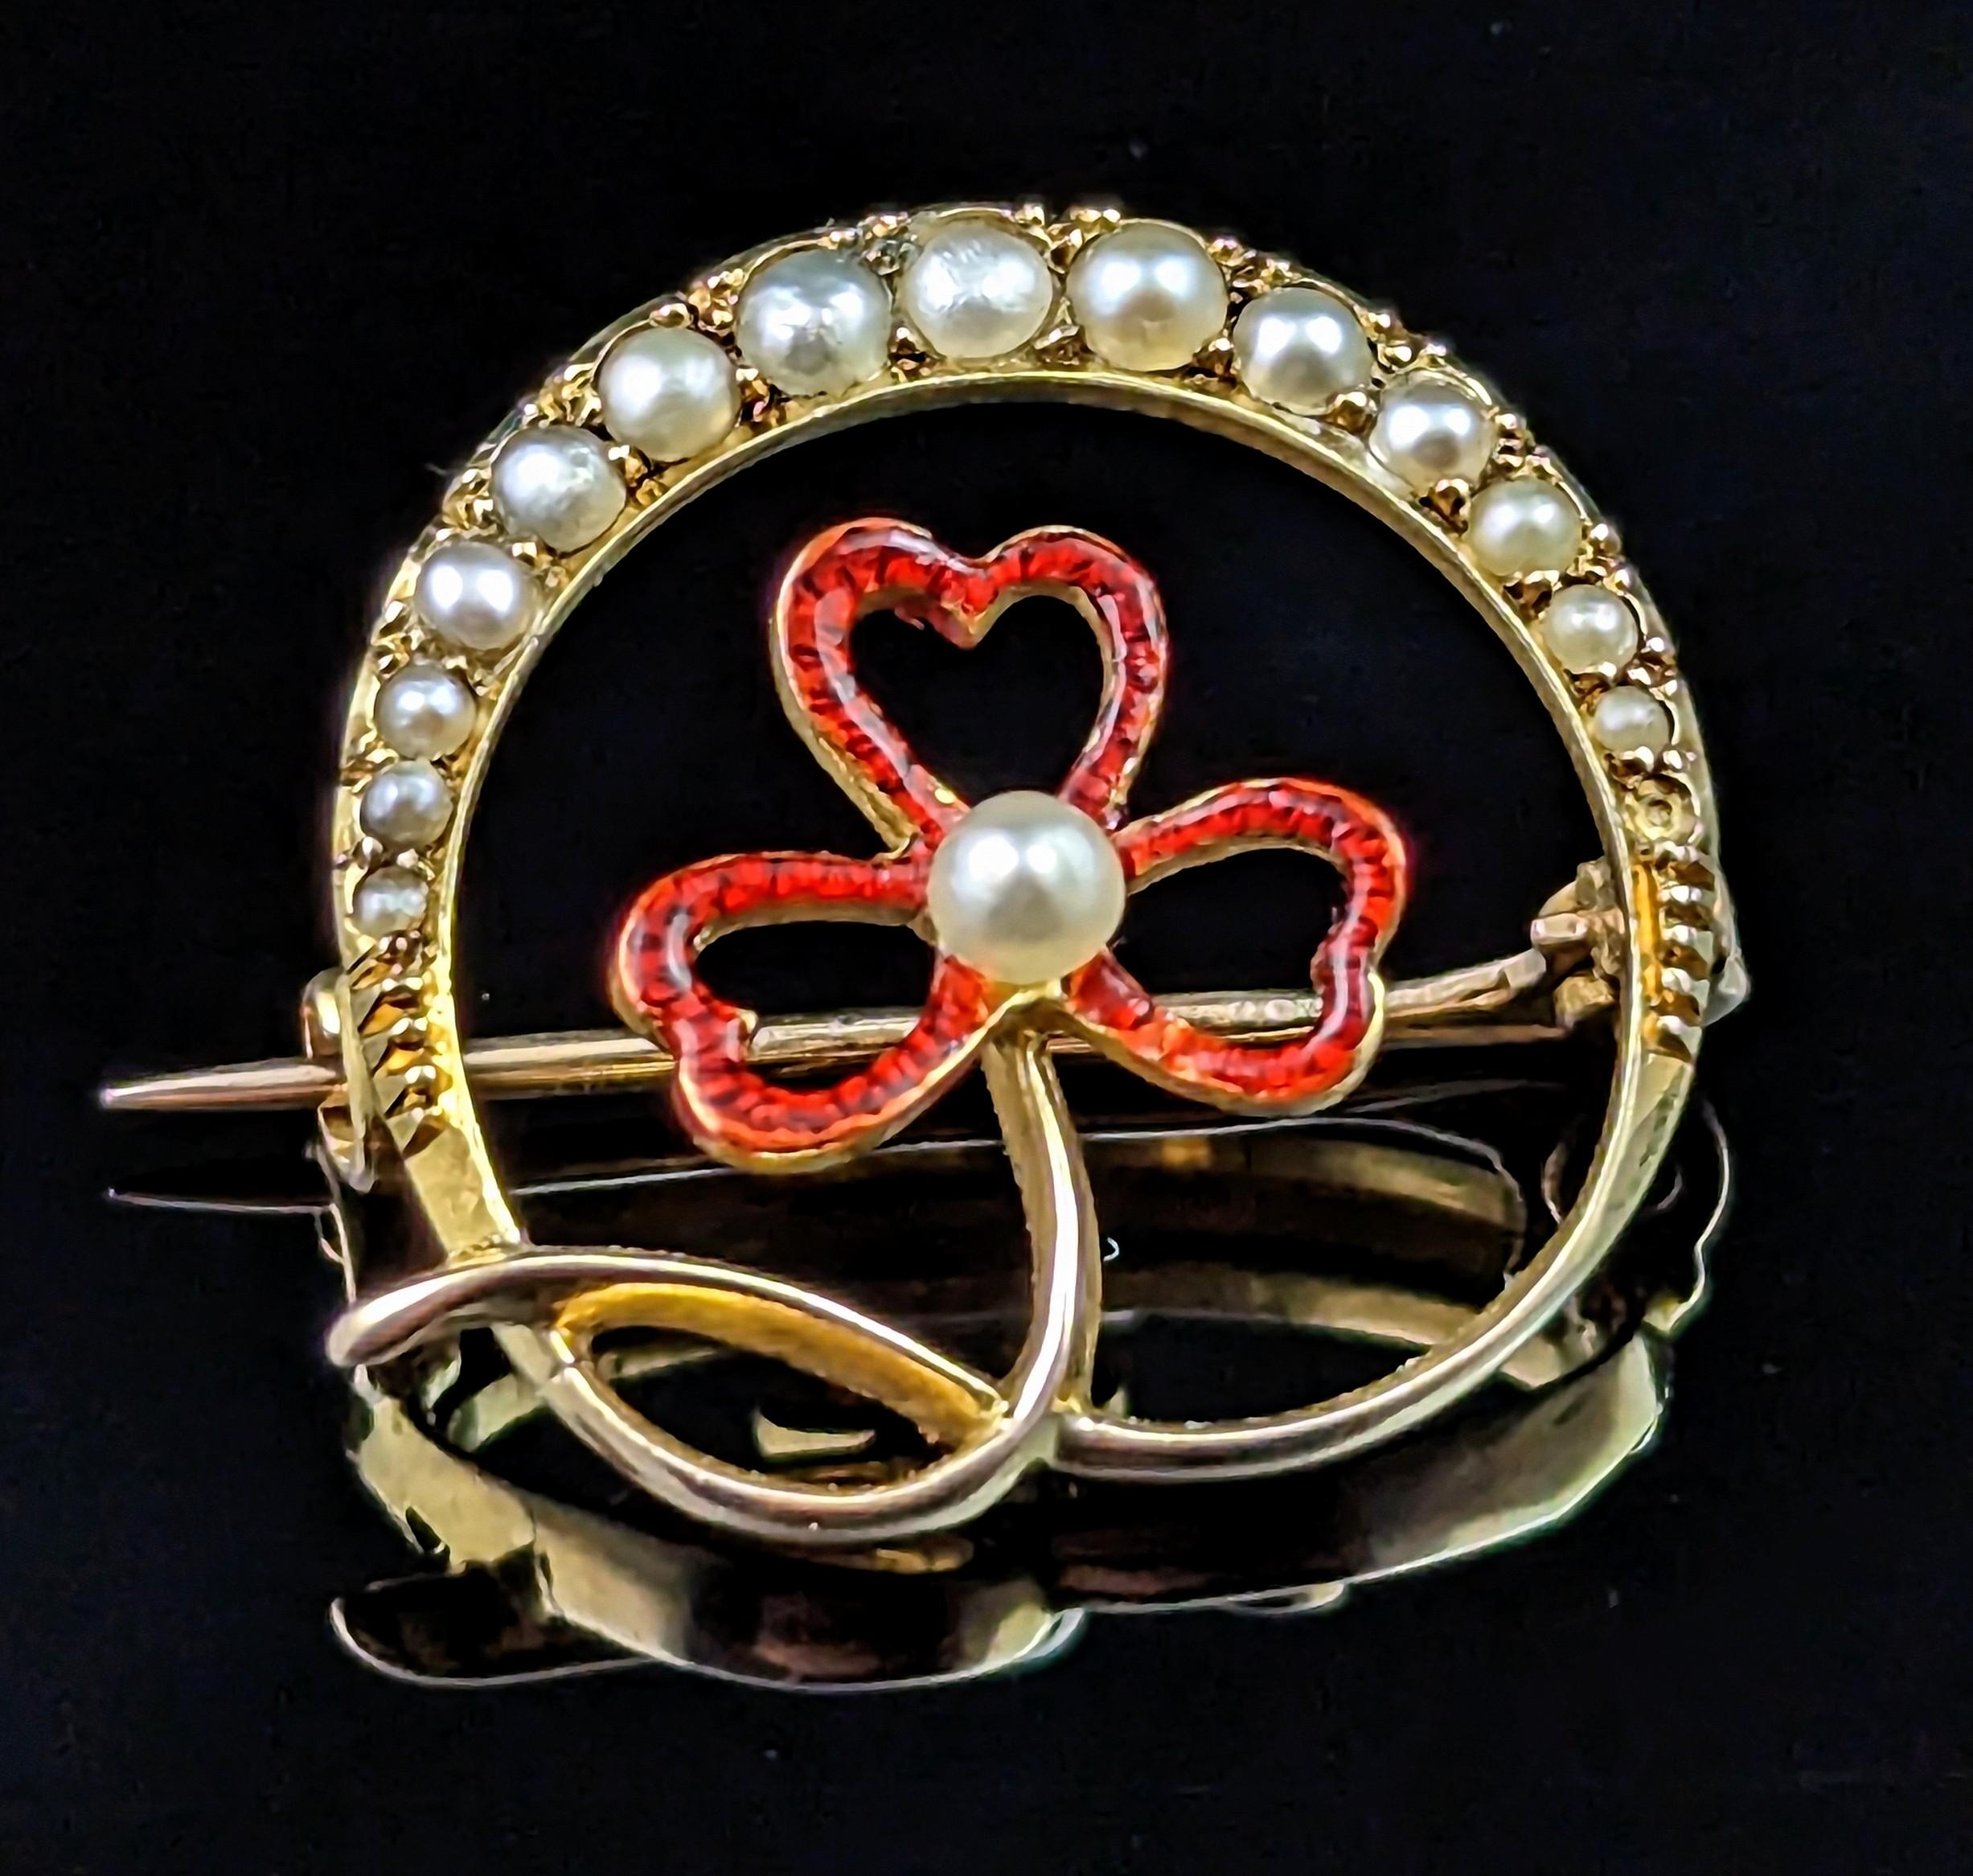 This Sweet antique crescent and shamrock brooch is so amazingly beautiful.

A scarce and unusual piece it is a delicate and dainty piece with a beautiful yet bold design.

The brooch is crafted in rich 15kt yellow gold with a pretty pearl set